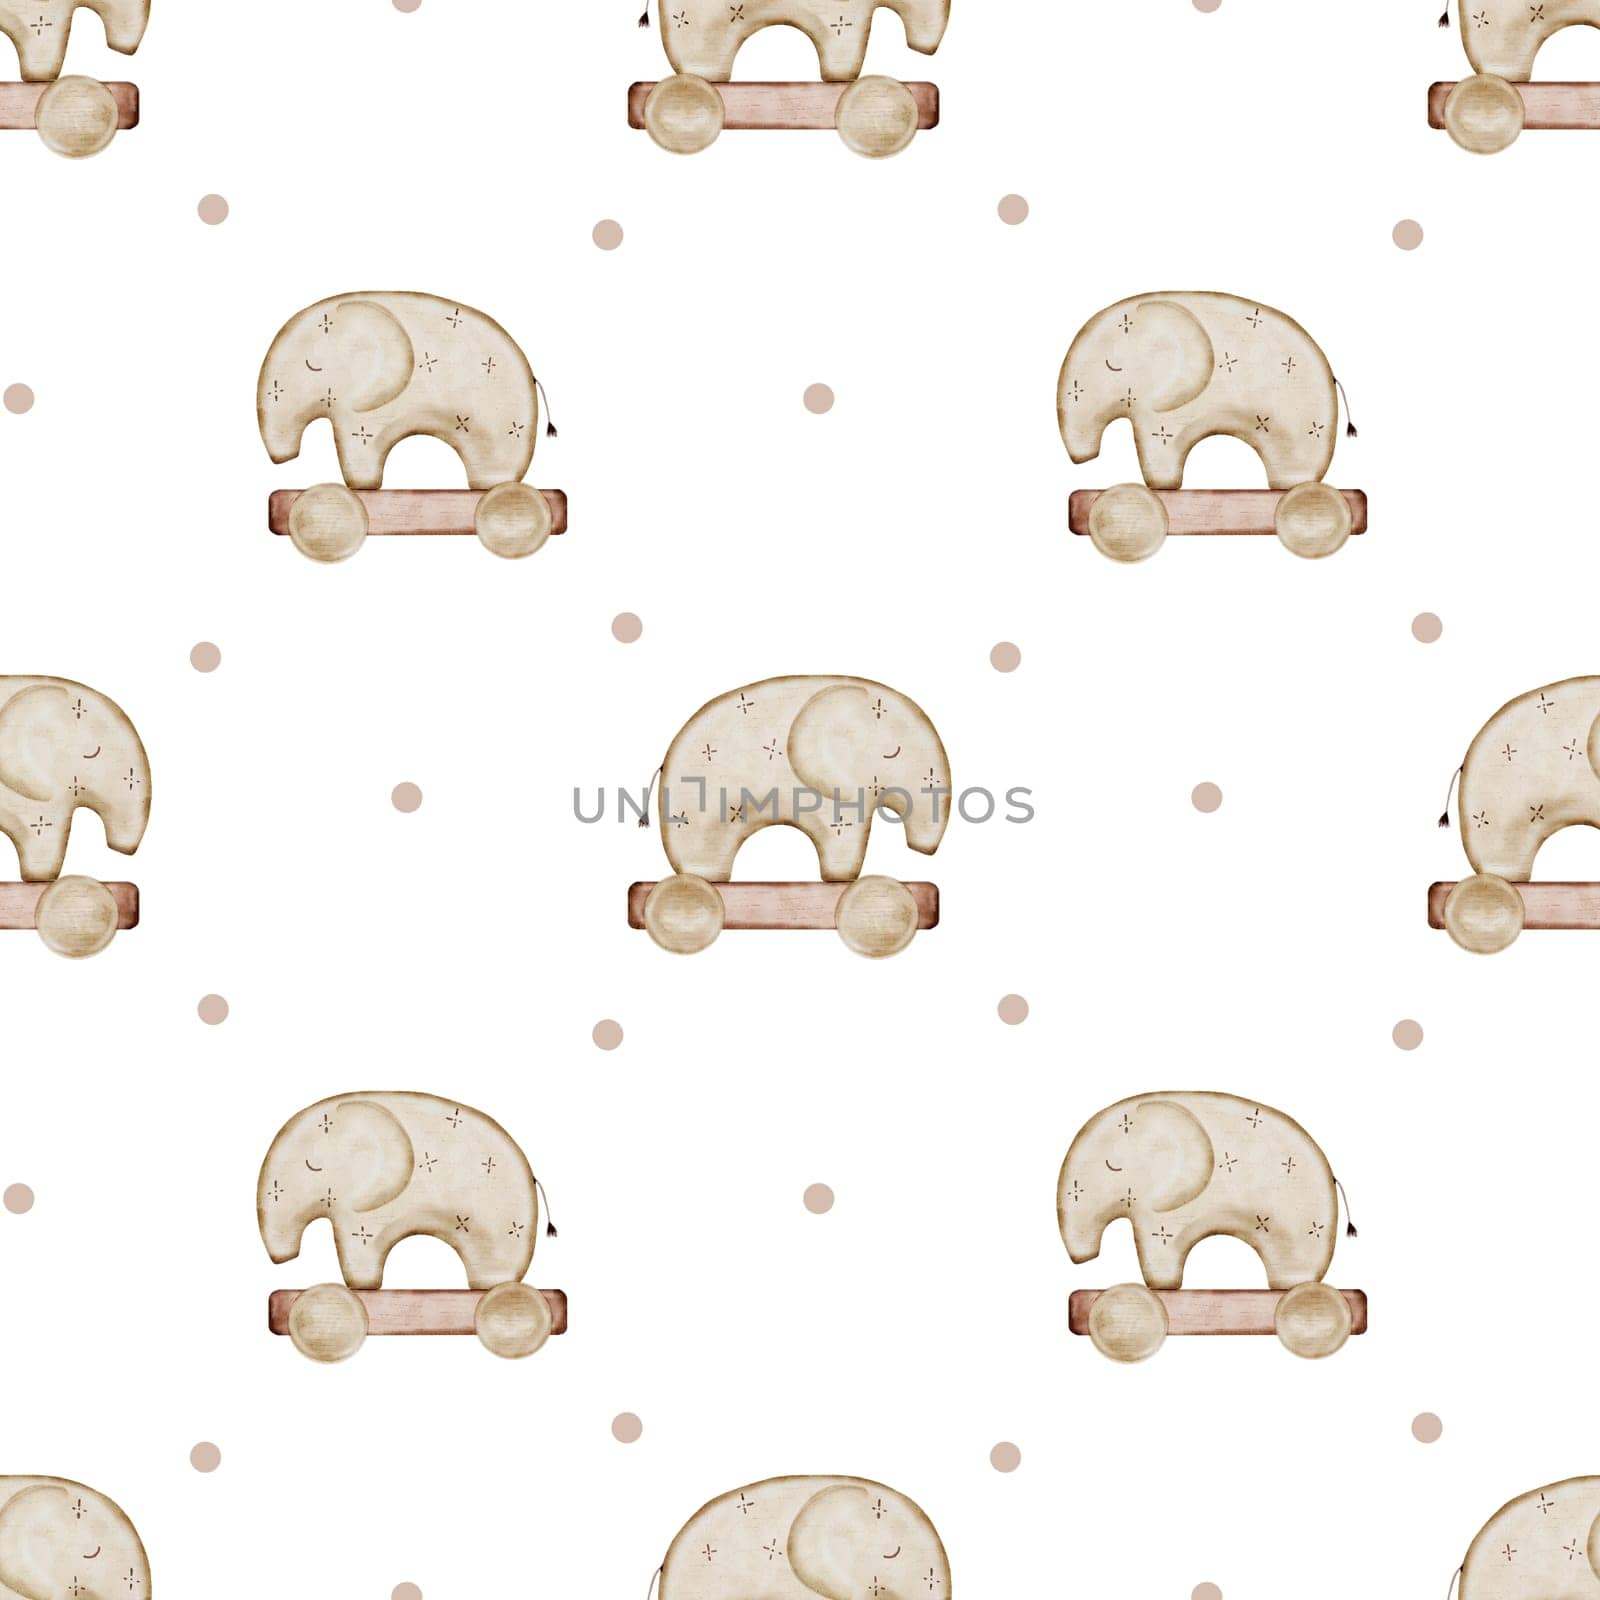 Baby toy pattern. Watercolor seamless pattern with wooden elephant on wheels and dots. Ornament in beige tones in Scandinavian boho style. For printing on children's textiles, pajamas, bed linen, diapers. High quality illustration